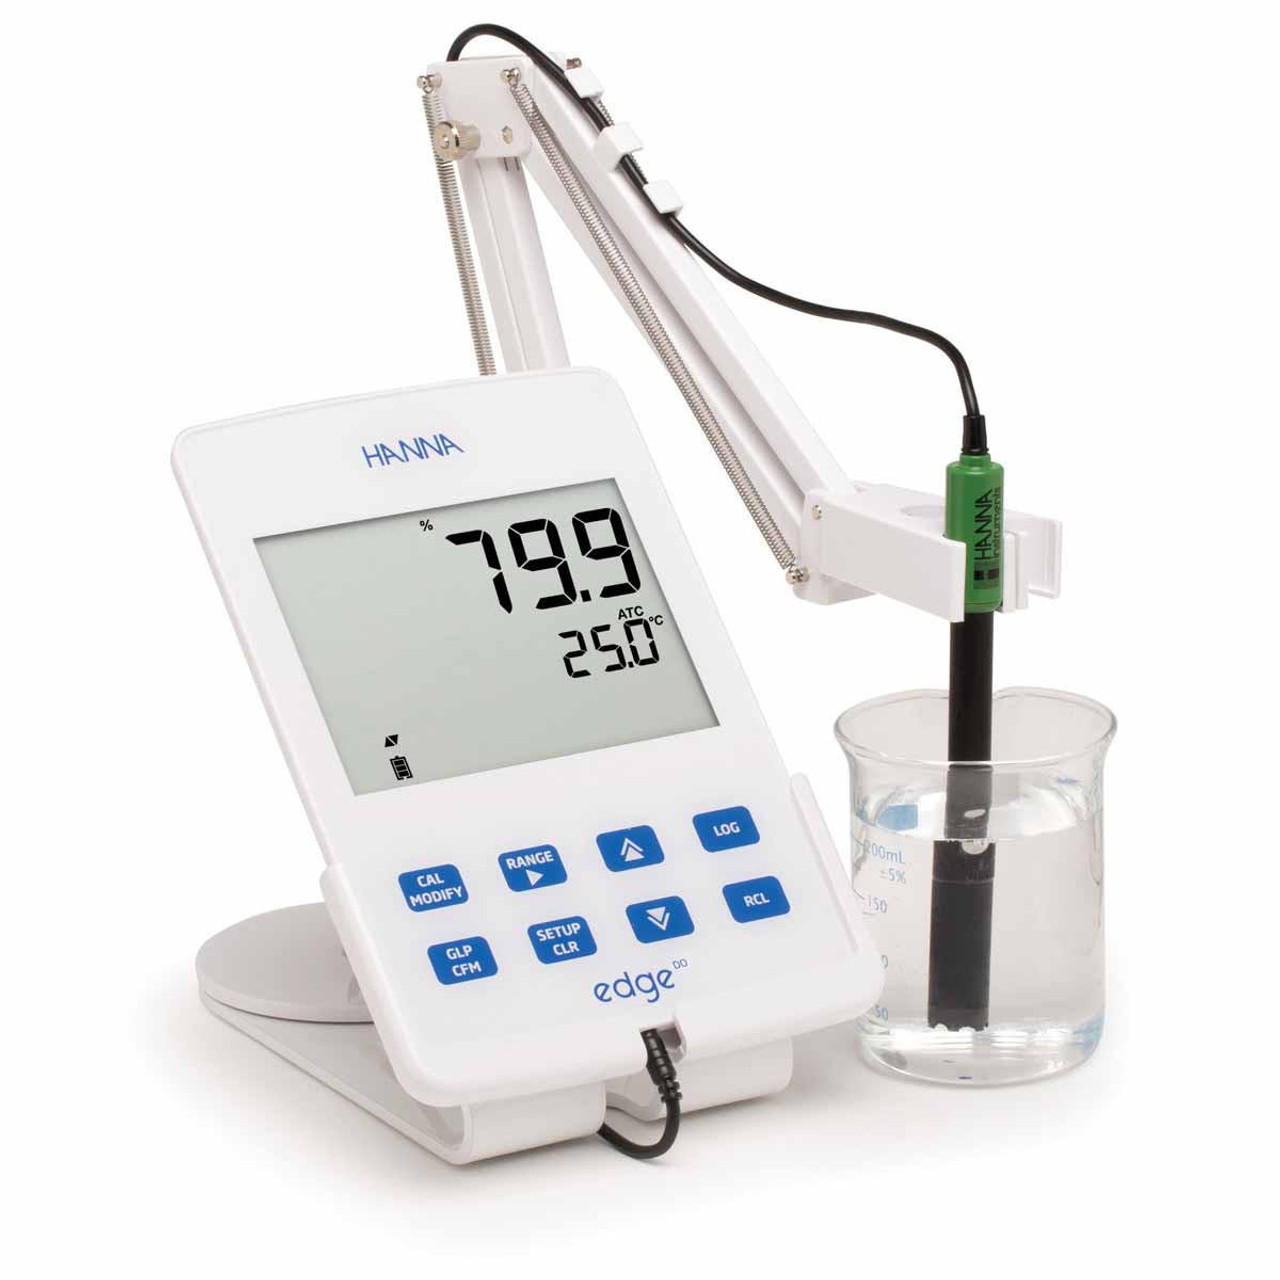 Thermometer, K Type HI-93531 K of Hanna Instruments